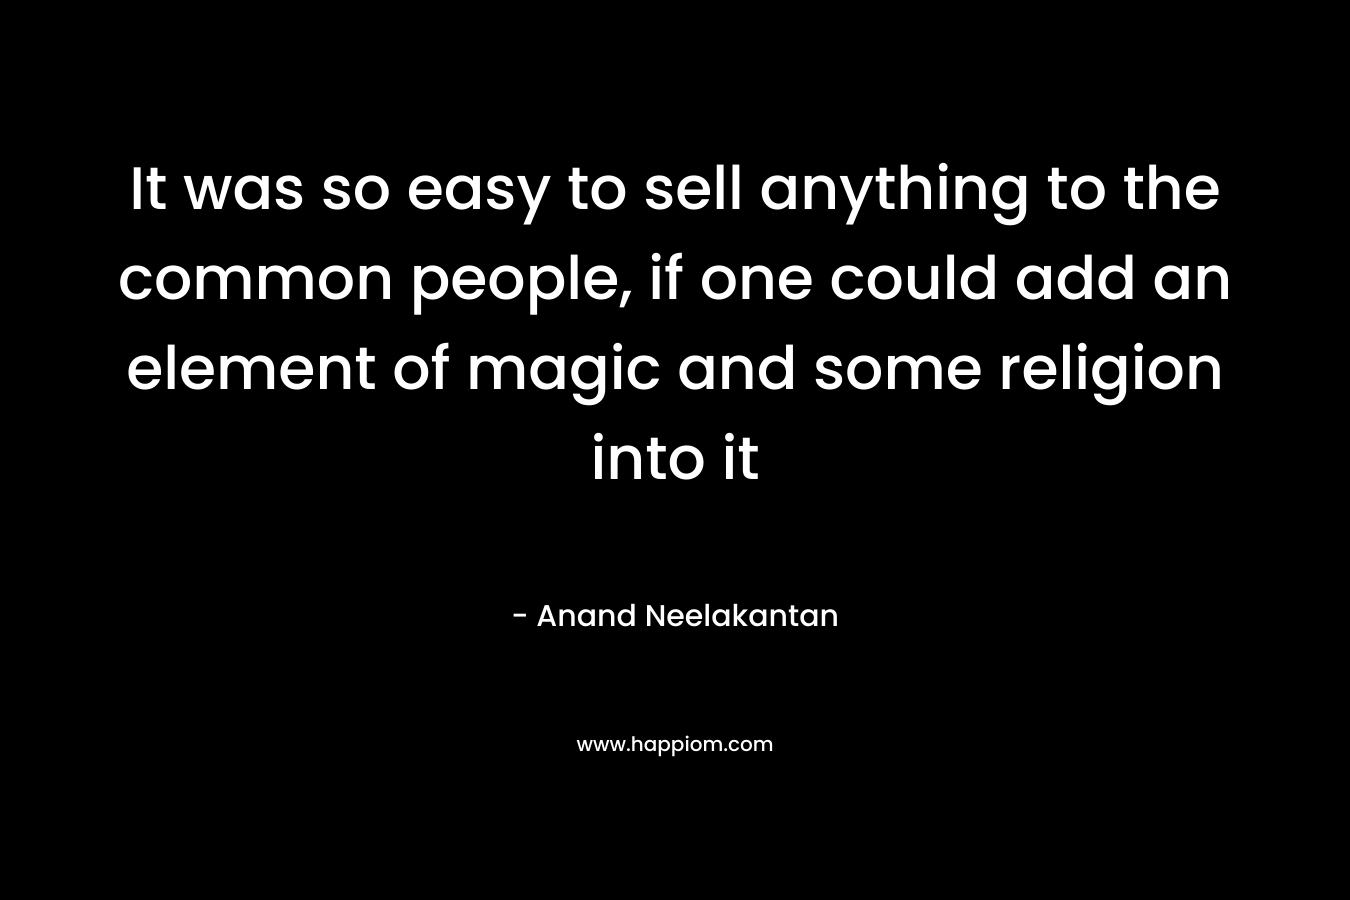 It was so easy to sell anything to the common people, if one could add an element of magic and some religion into it